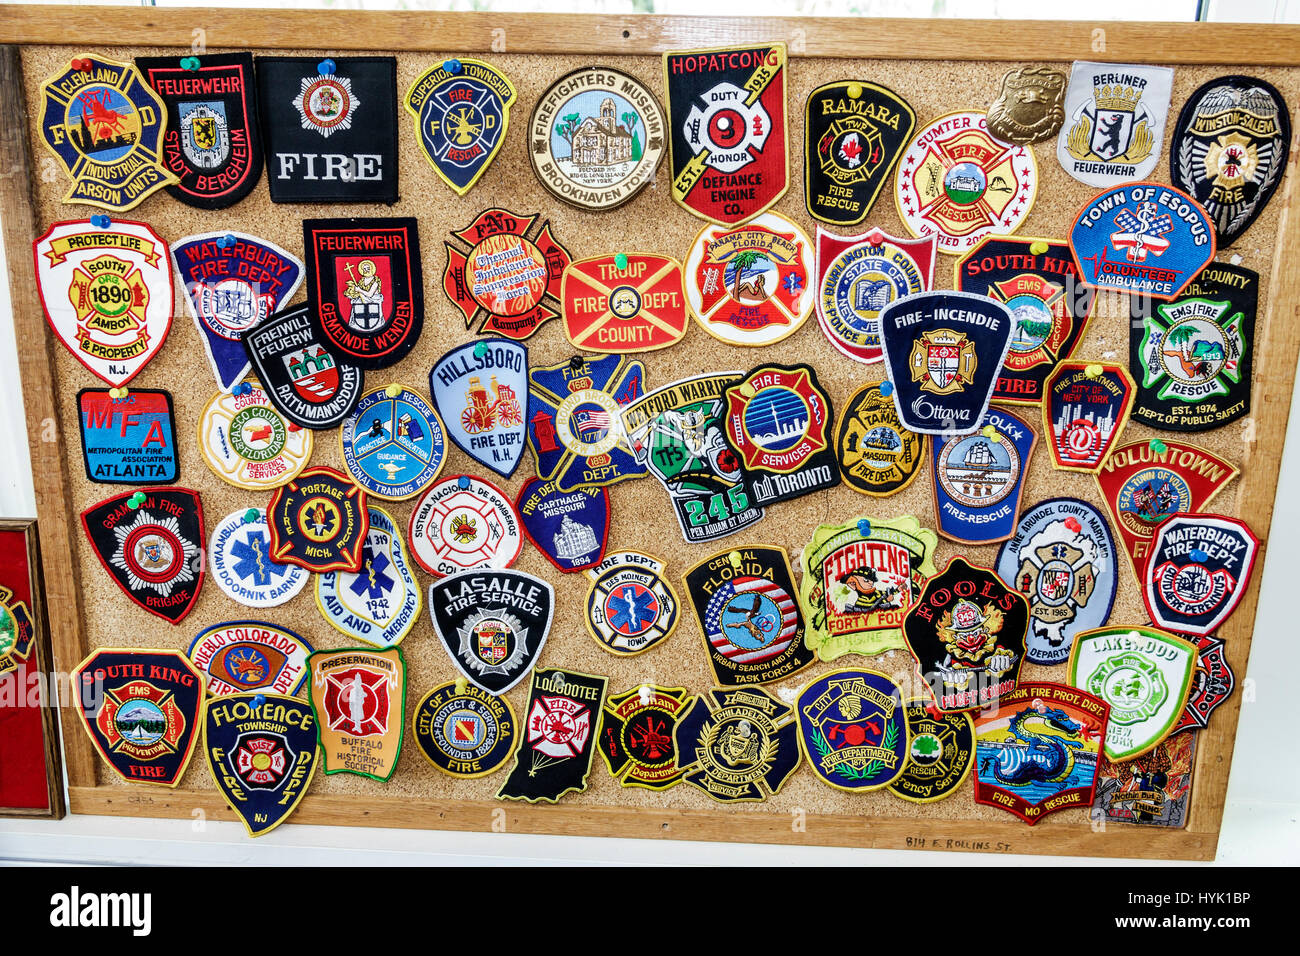 Orlando Florida,Loch Haven Park,cultural park,Orlando Fire Museum,firehouse,interior inside,fire department patches,display sale FL170222130 Stock Photo